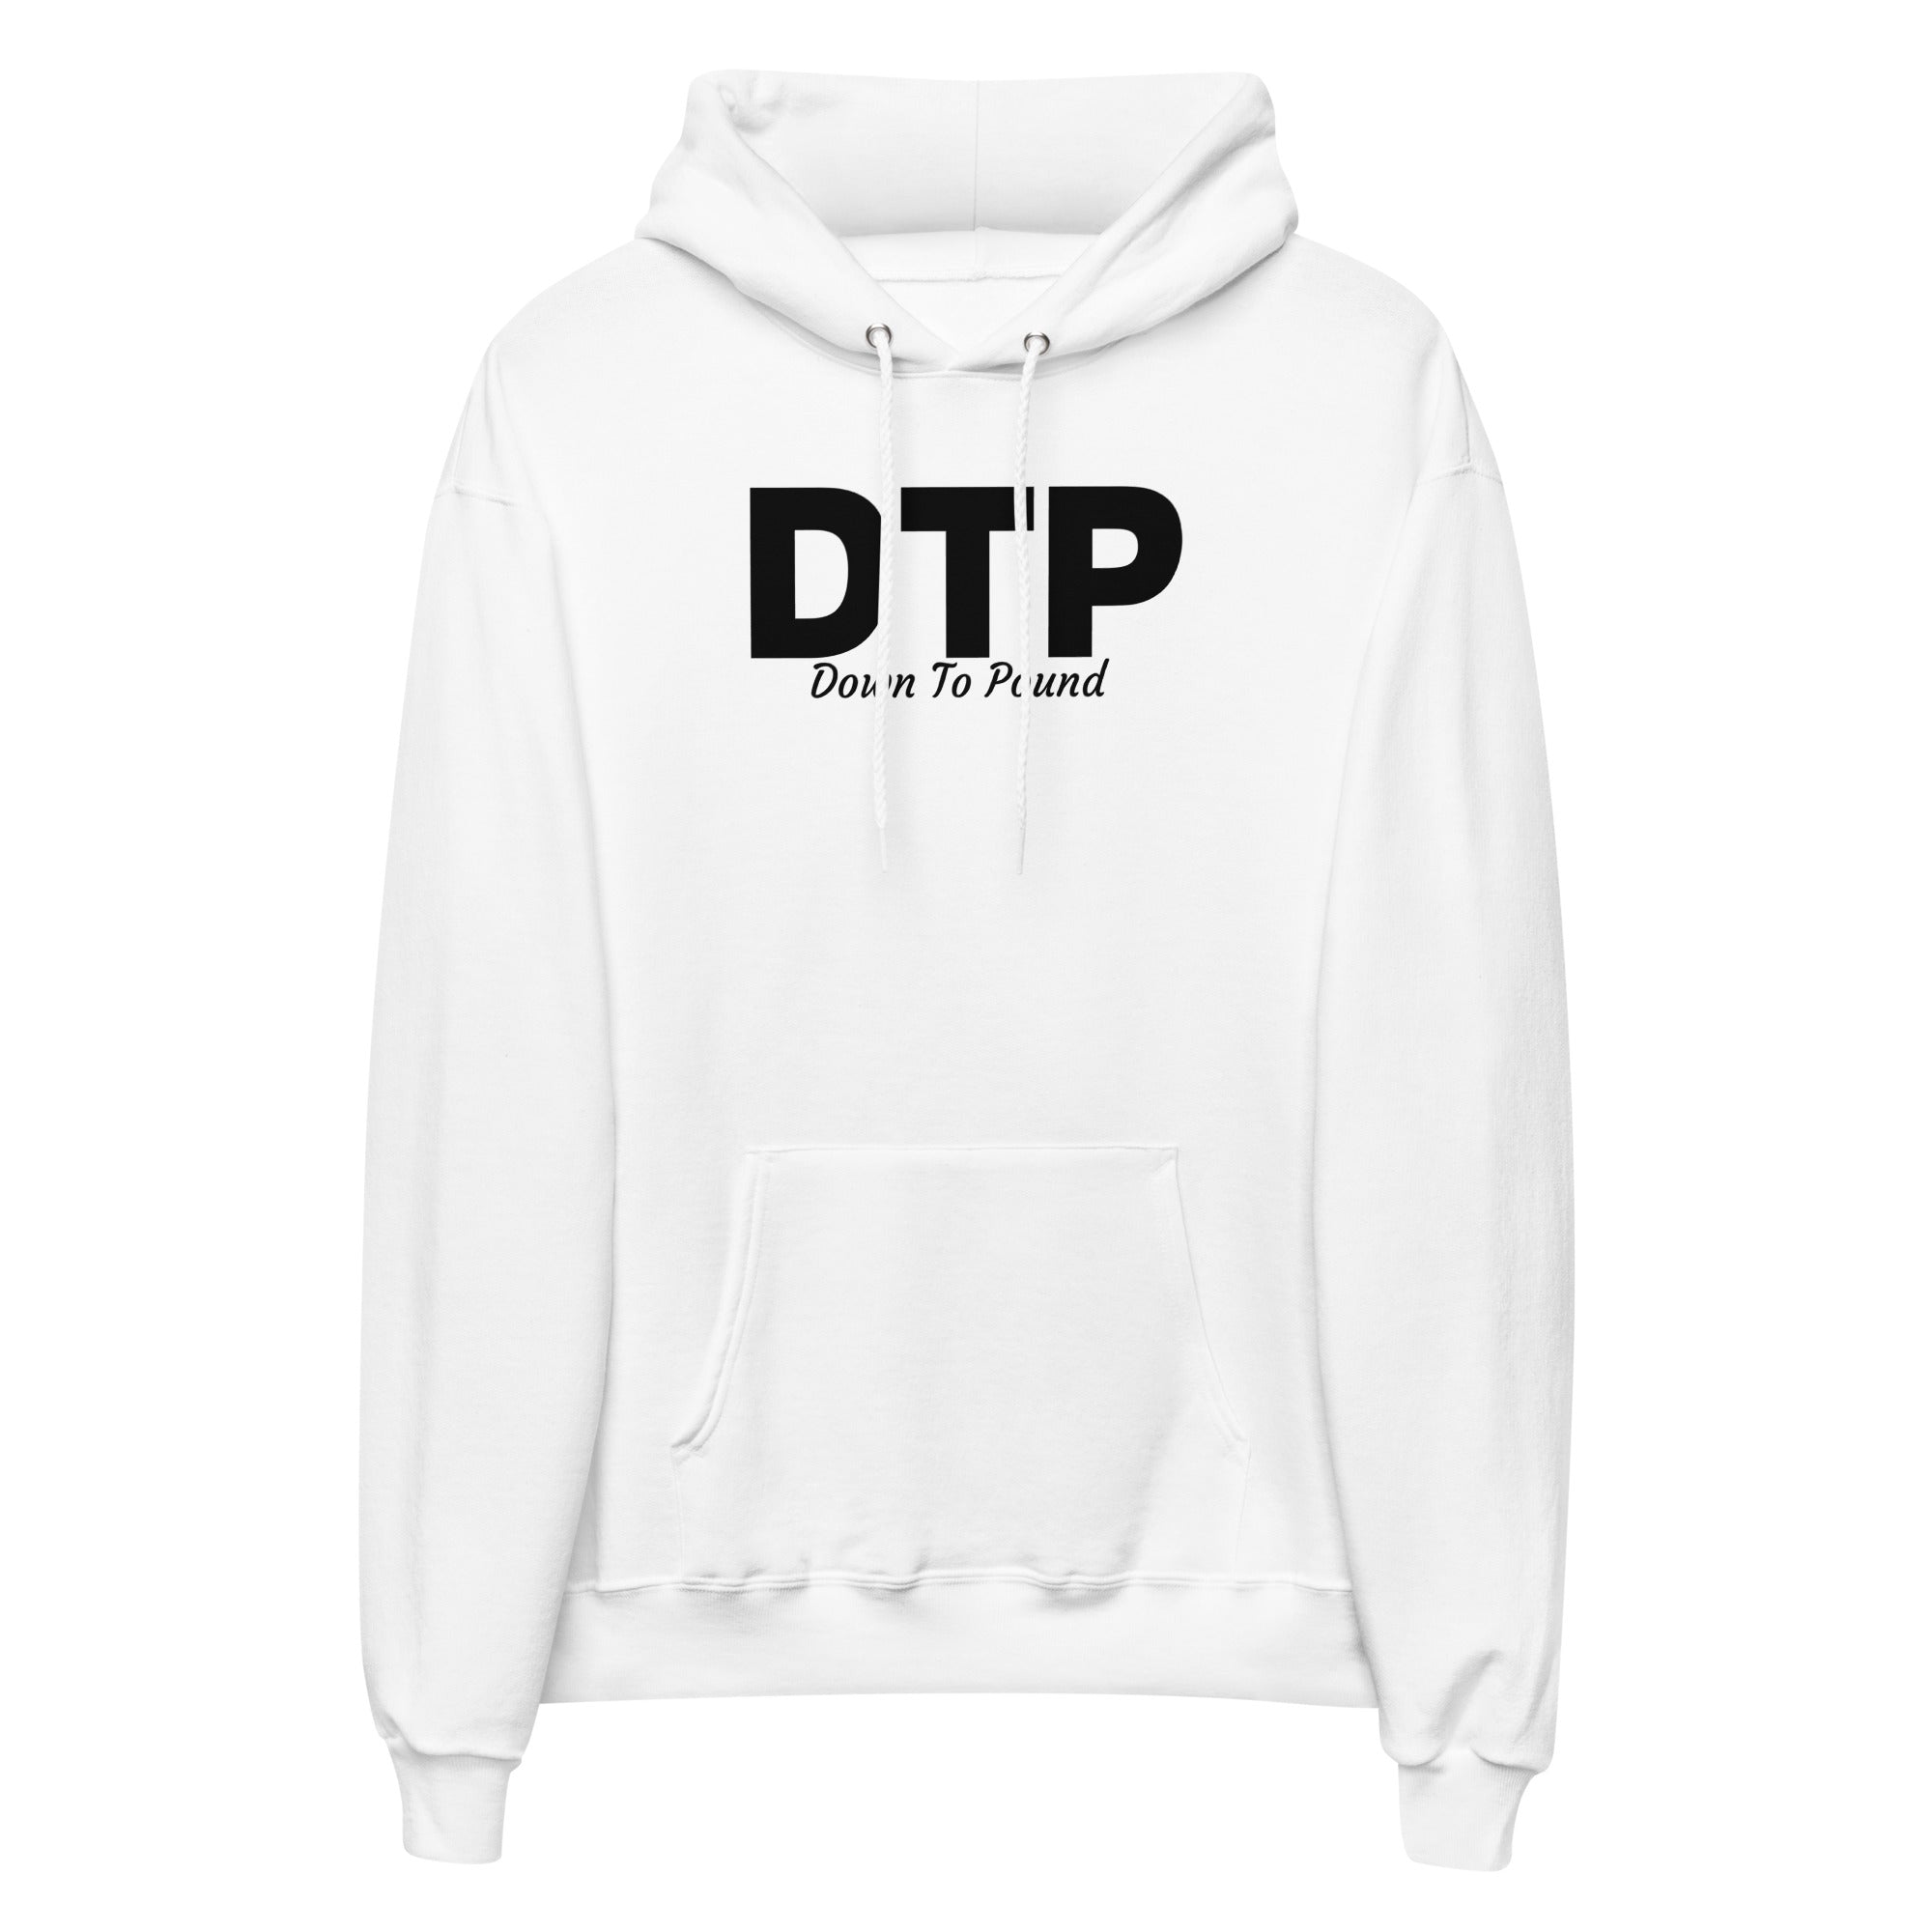 Down to Pound Hoodie